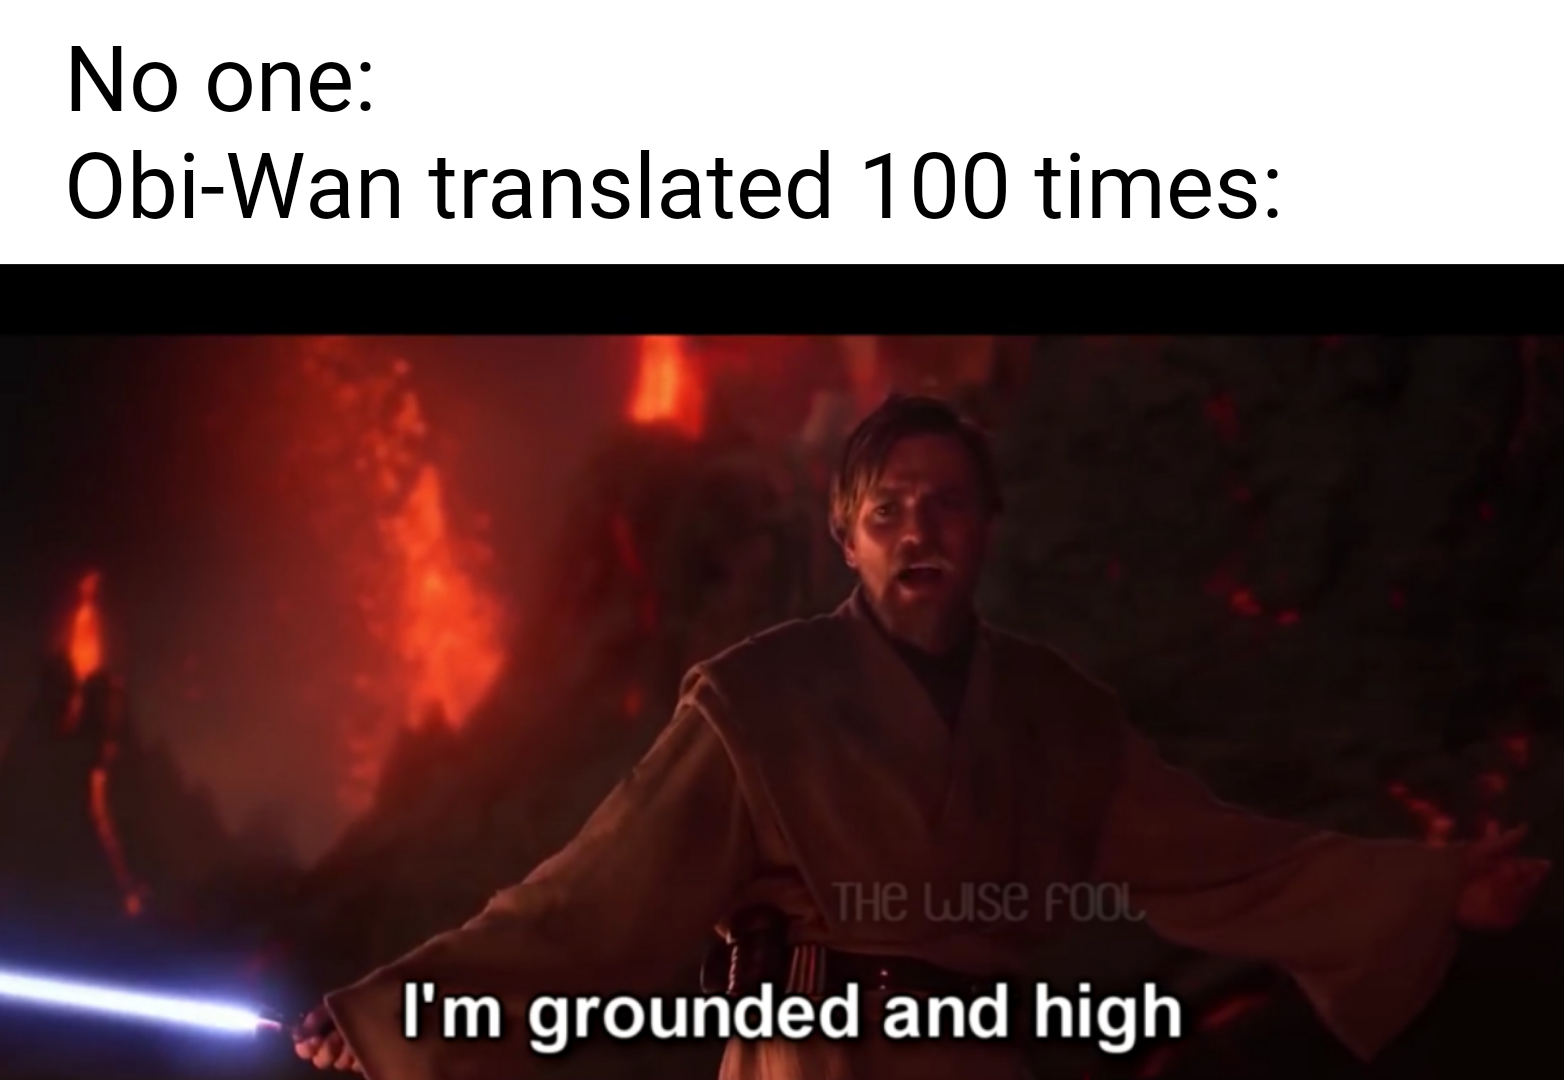 heat - No one ObiWan translated 100 times The wse fool I'm grounded and high